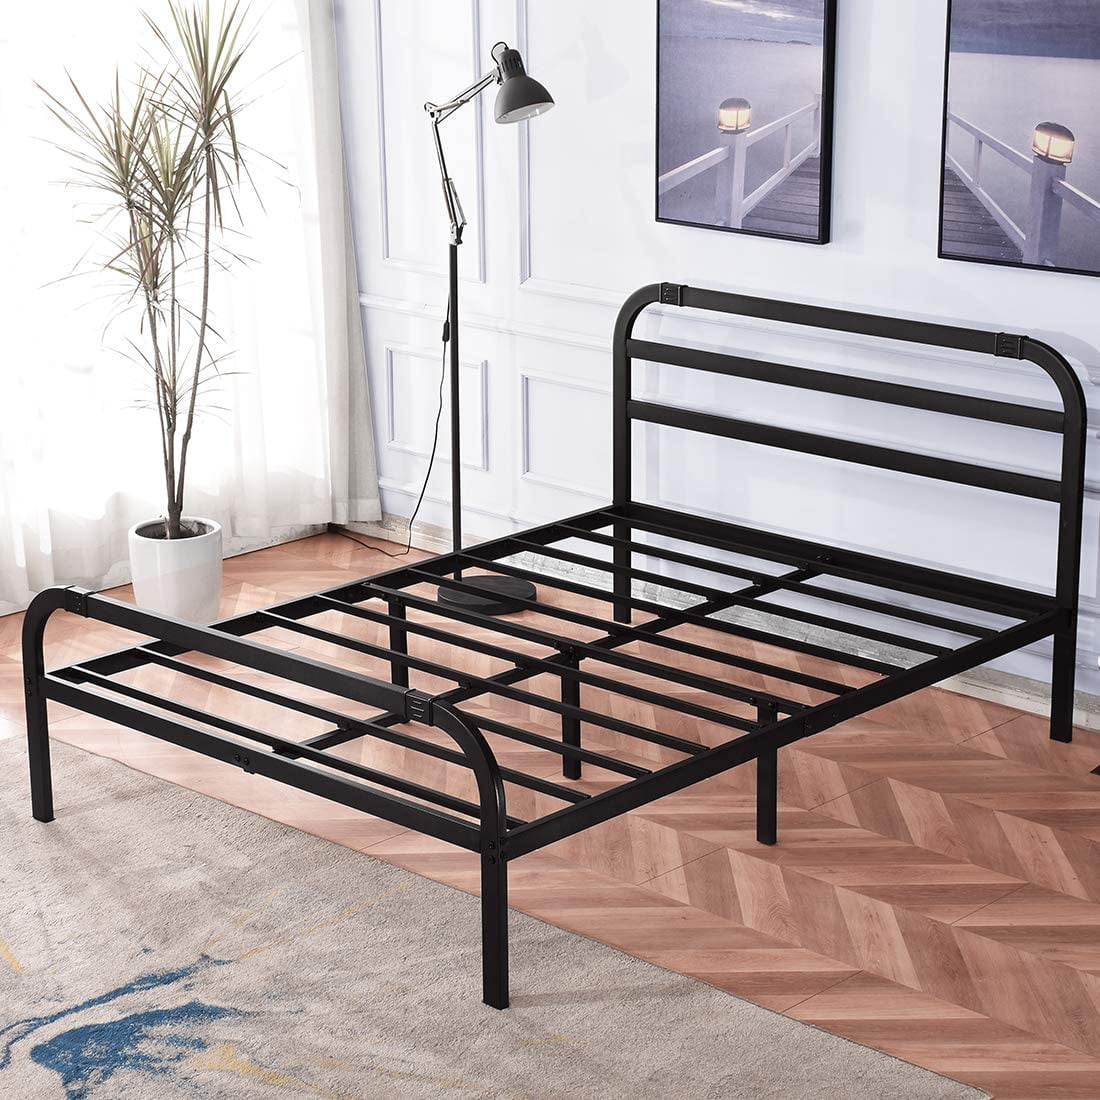 Tatago 14 King Size Bed Frame With, King Size Metal Bed Frame With Headboard